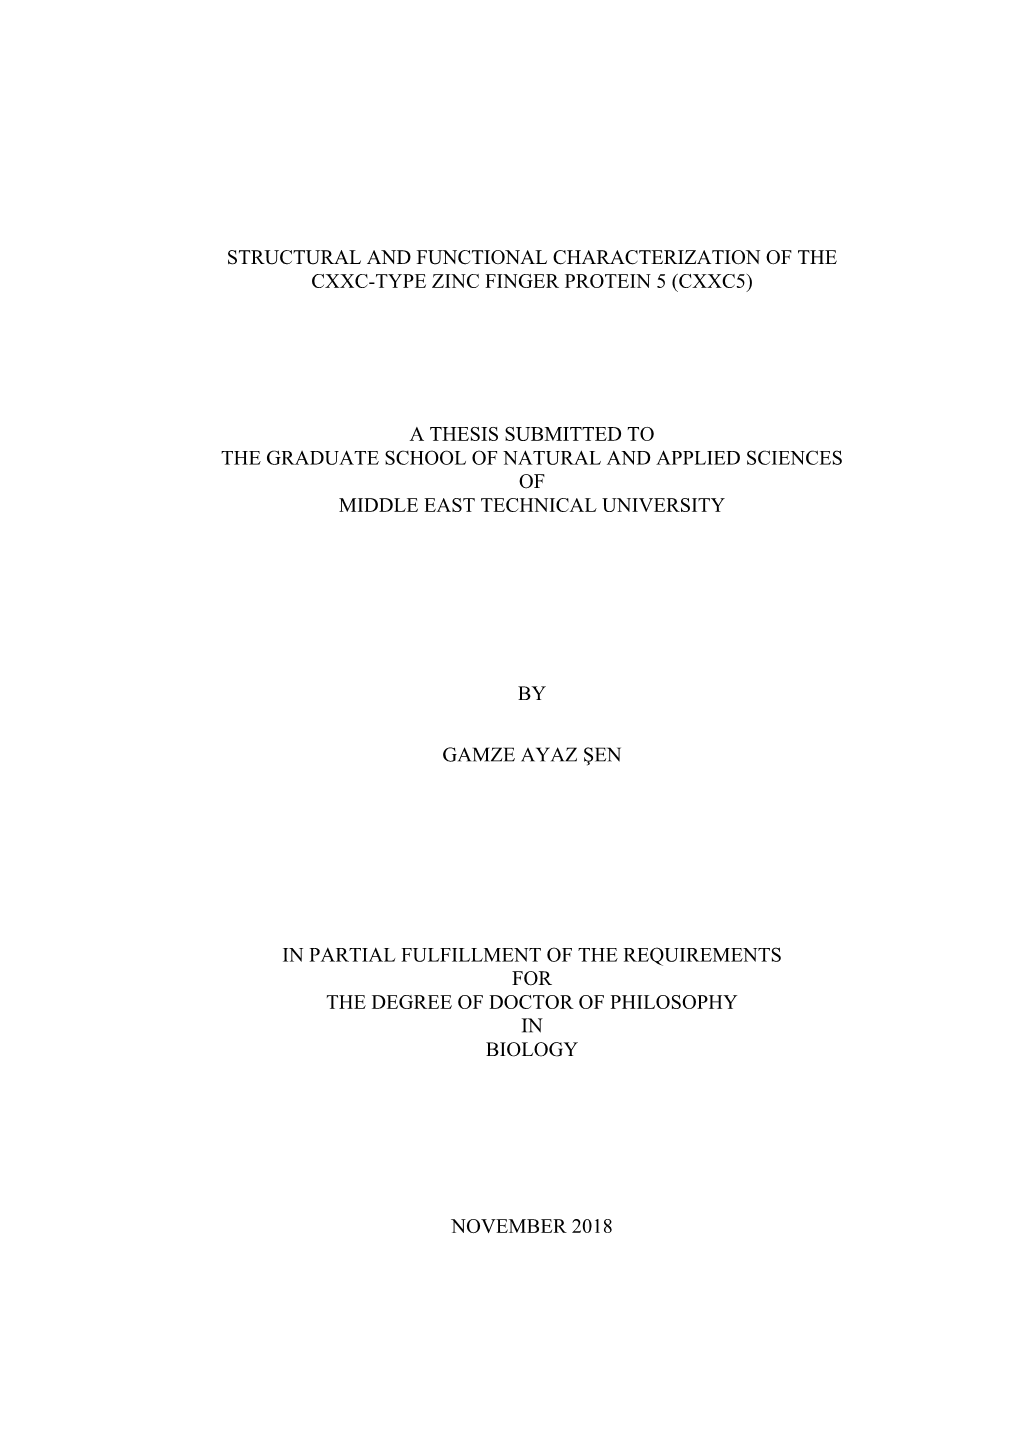 (Cxxc5) a Thesis Submitted to the Graduate